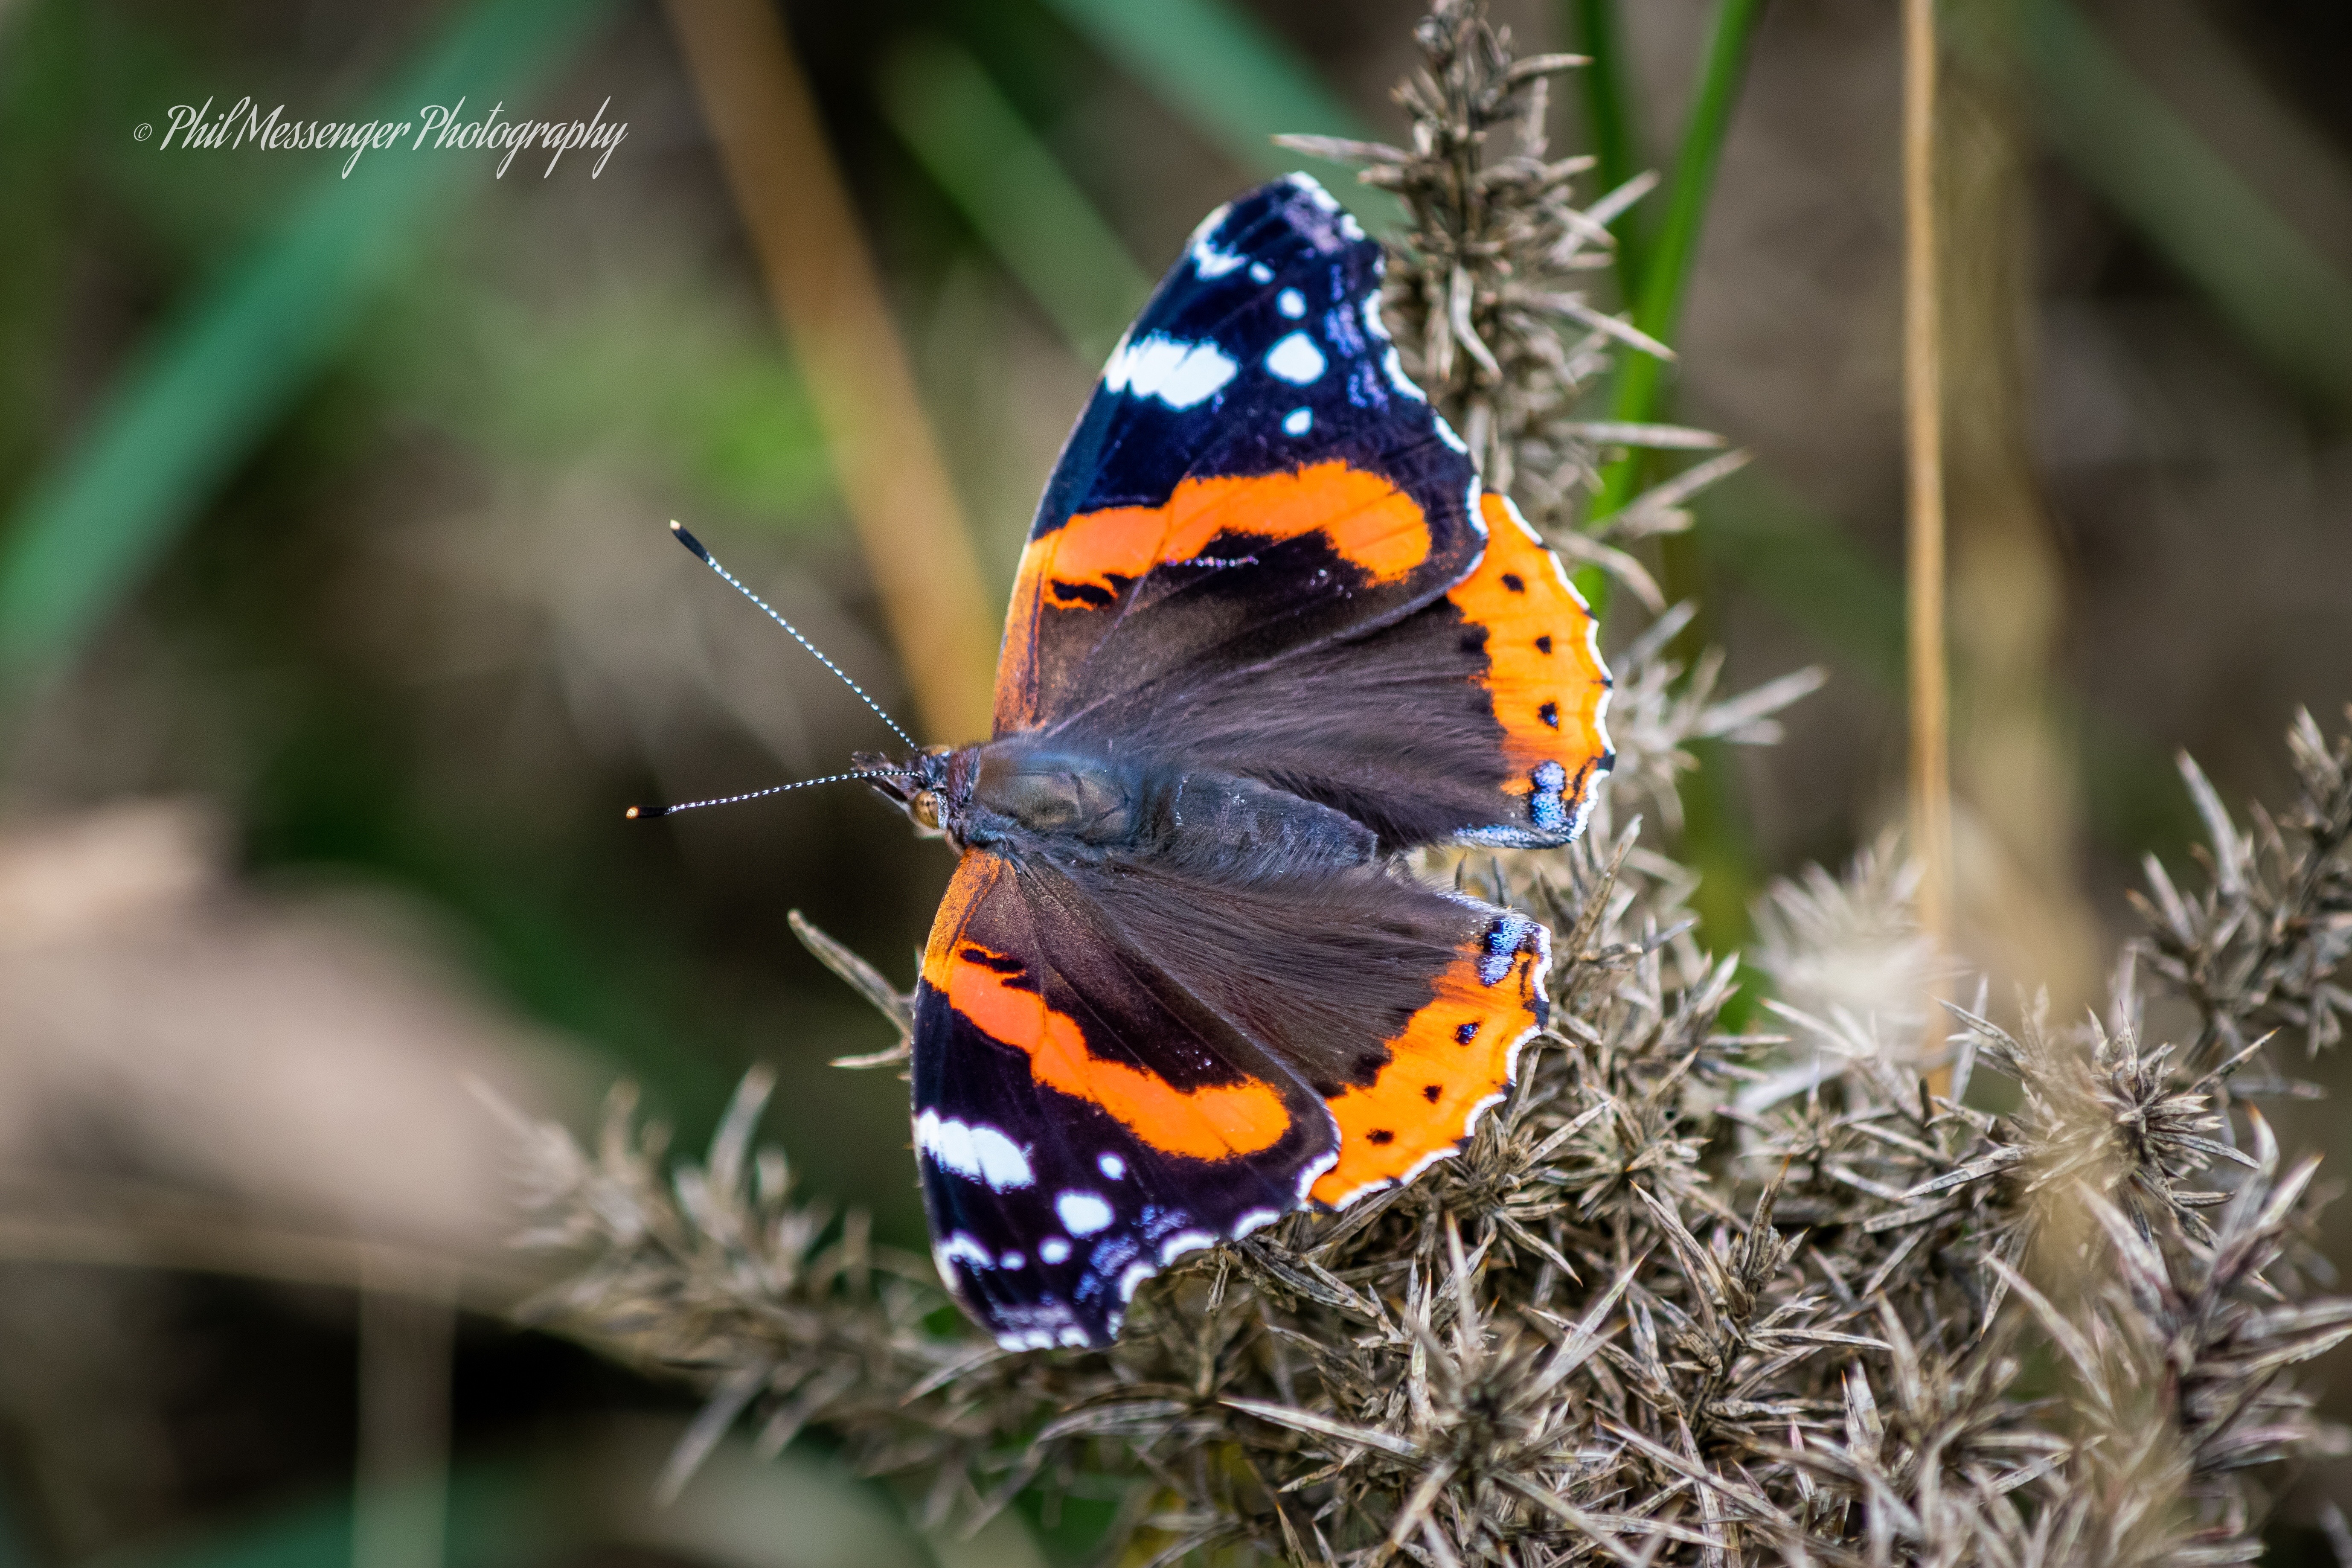 Red Admiral butterfly at Fyfield Down Wiltshire.